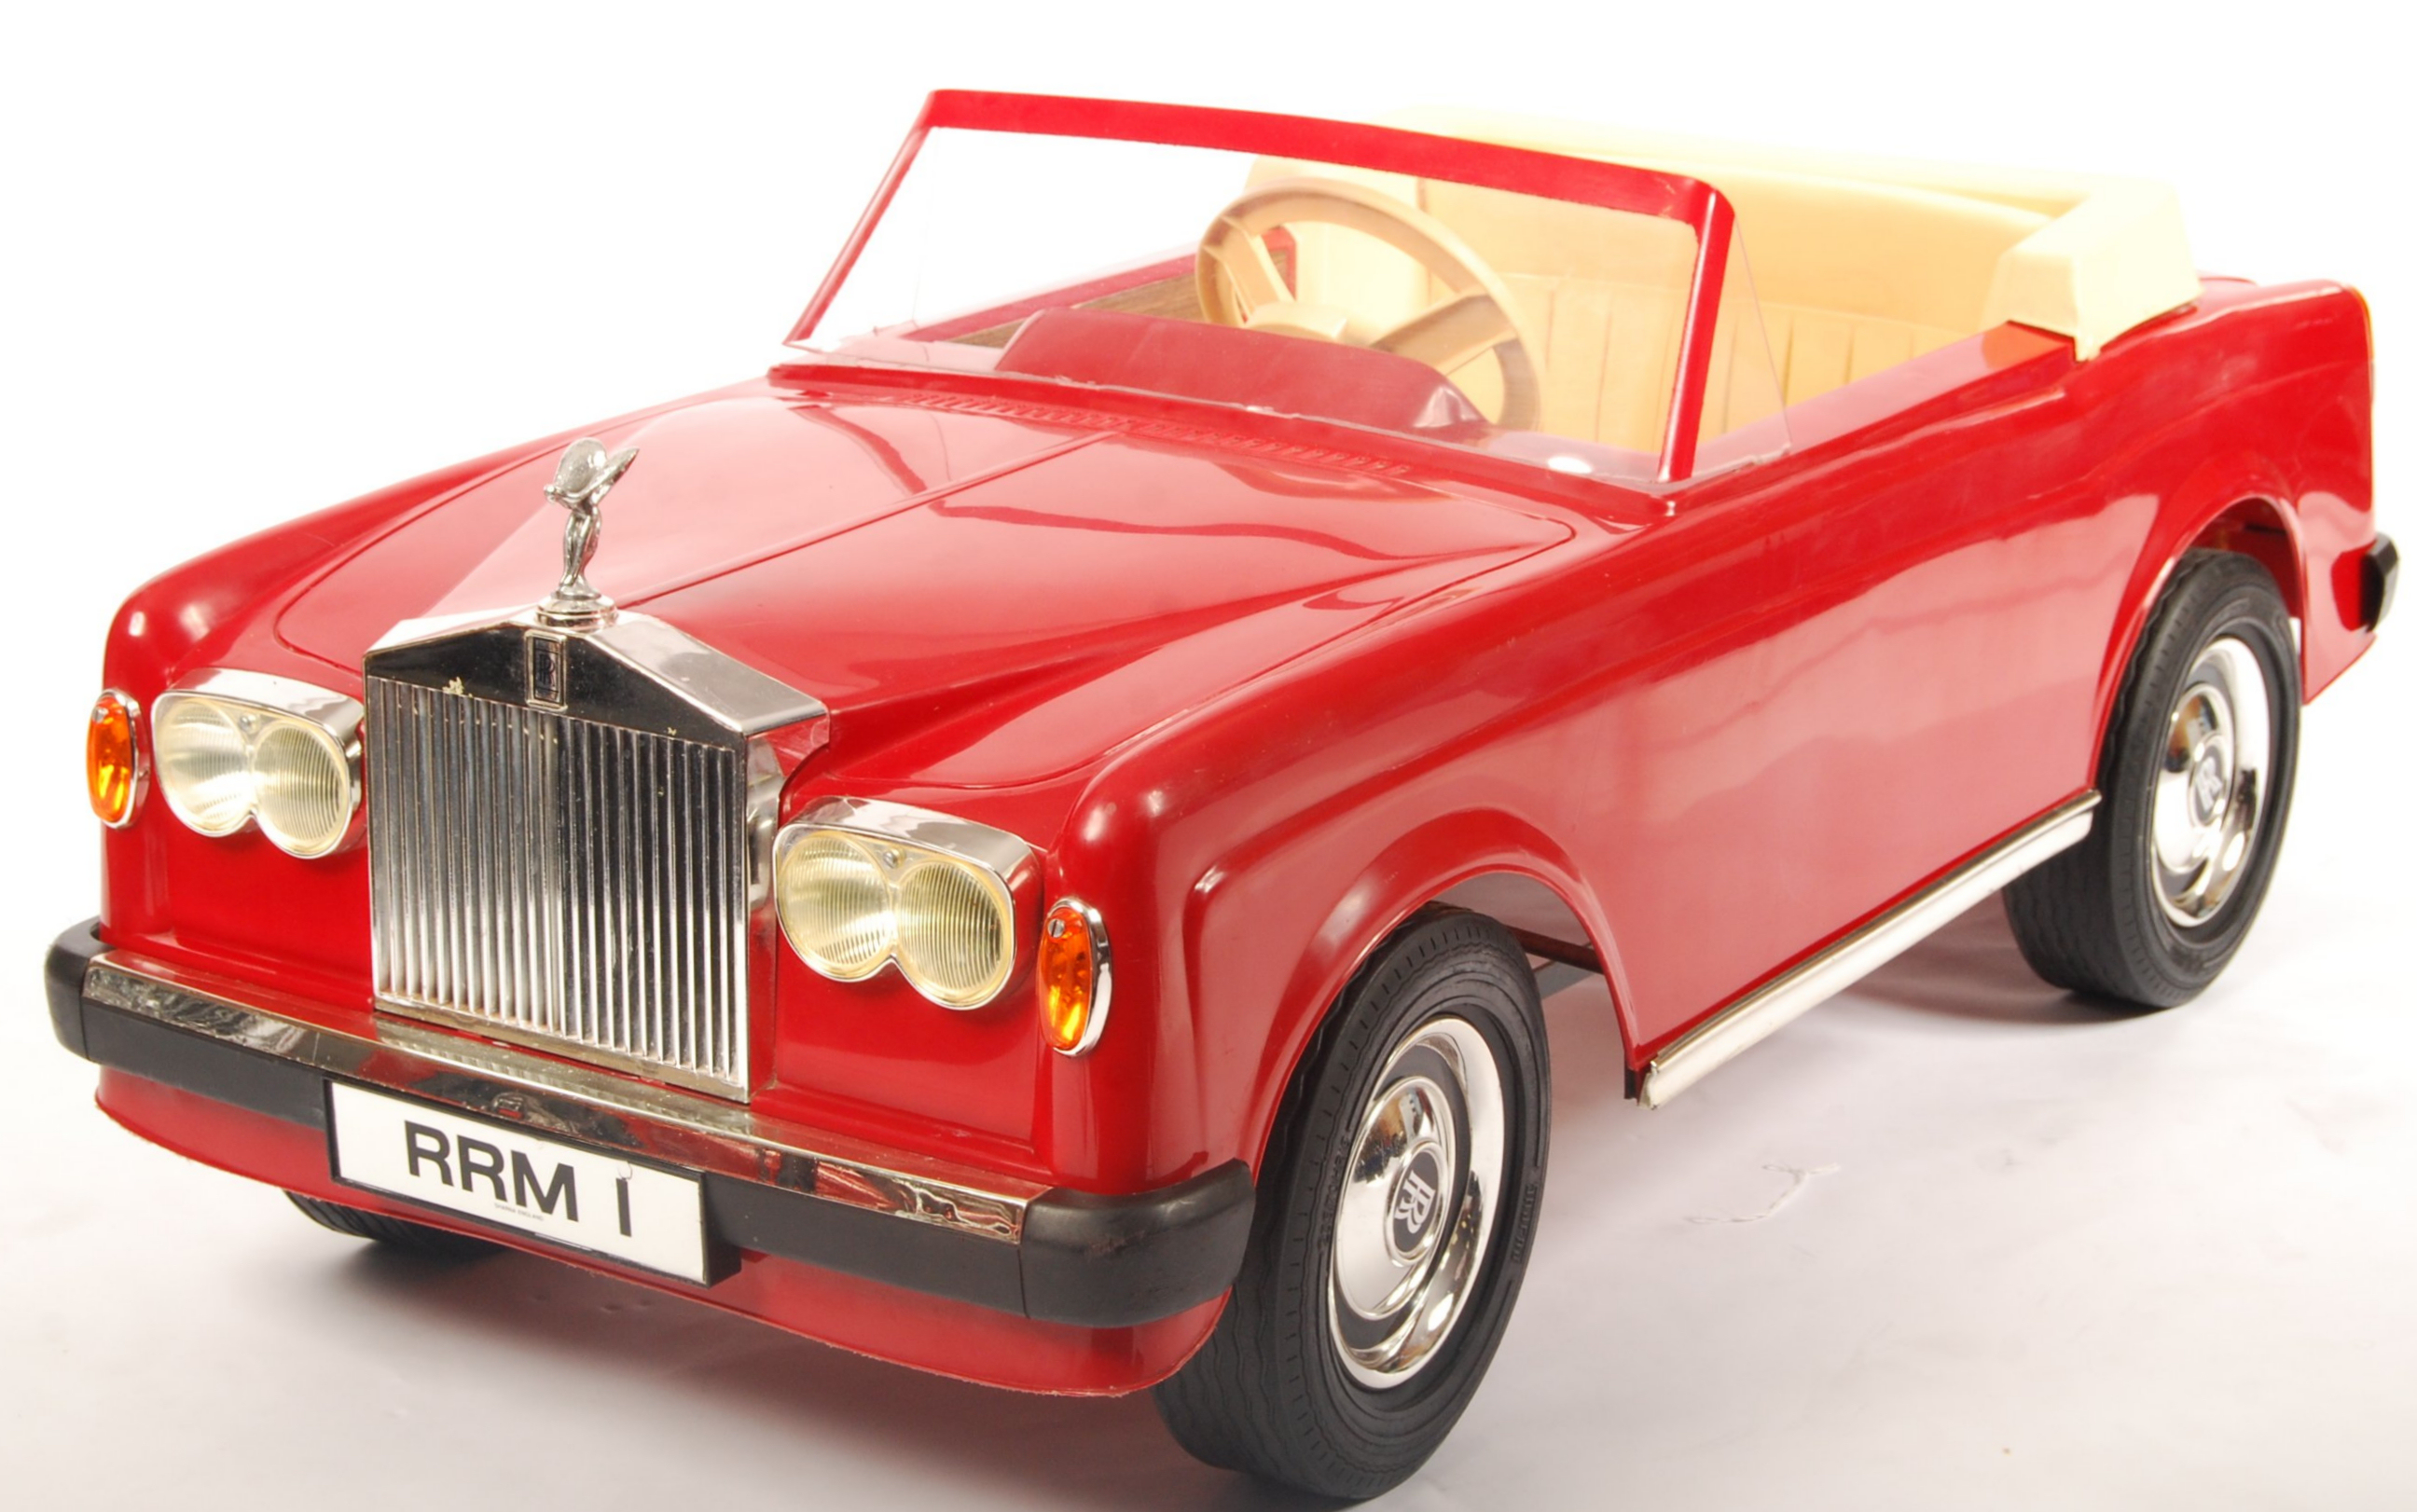 Mini Pedal Car "Too Small For Child To Ride" Rolls Royce Metal Body Race Model 